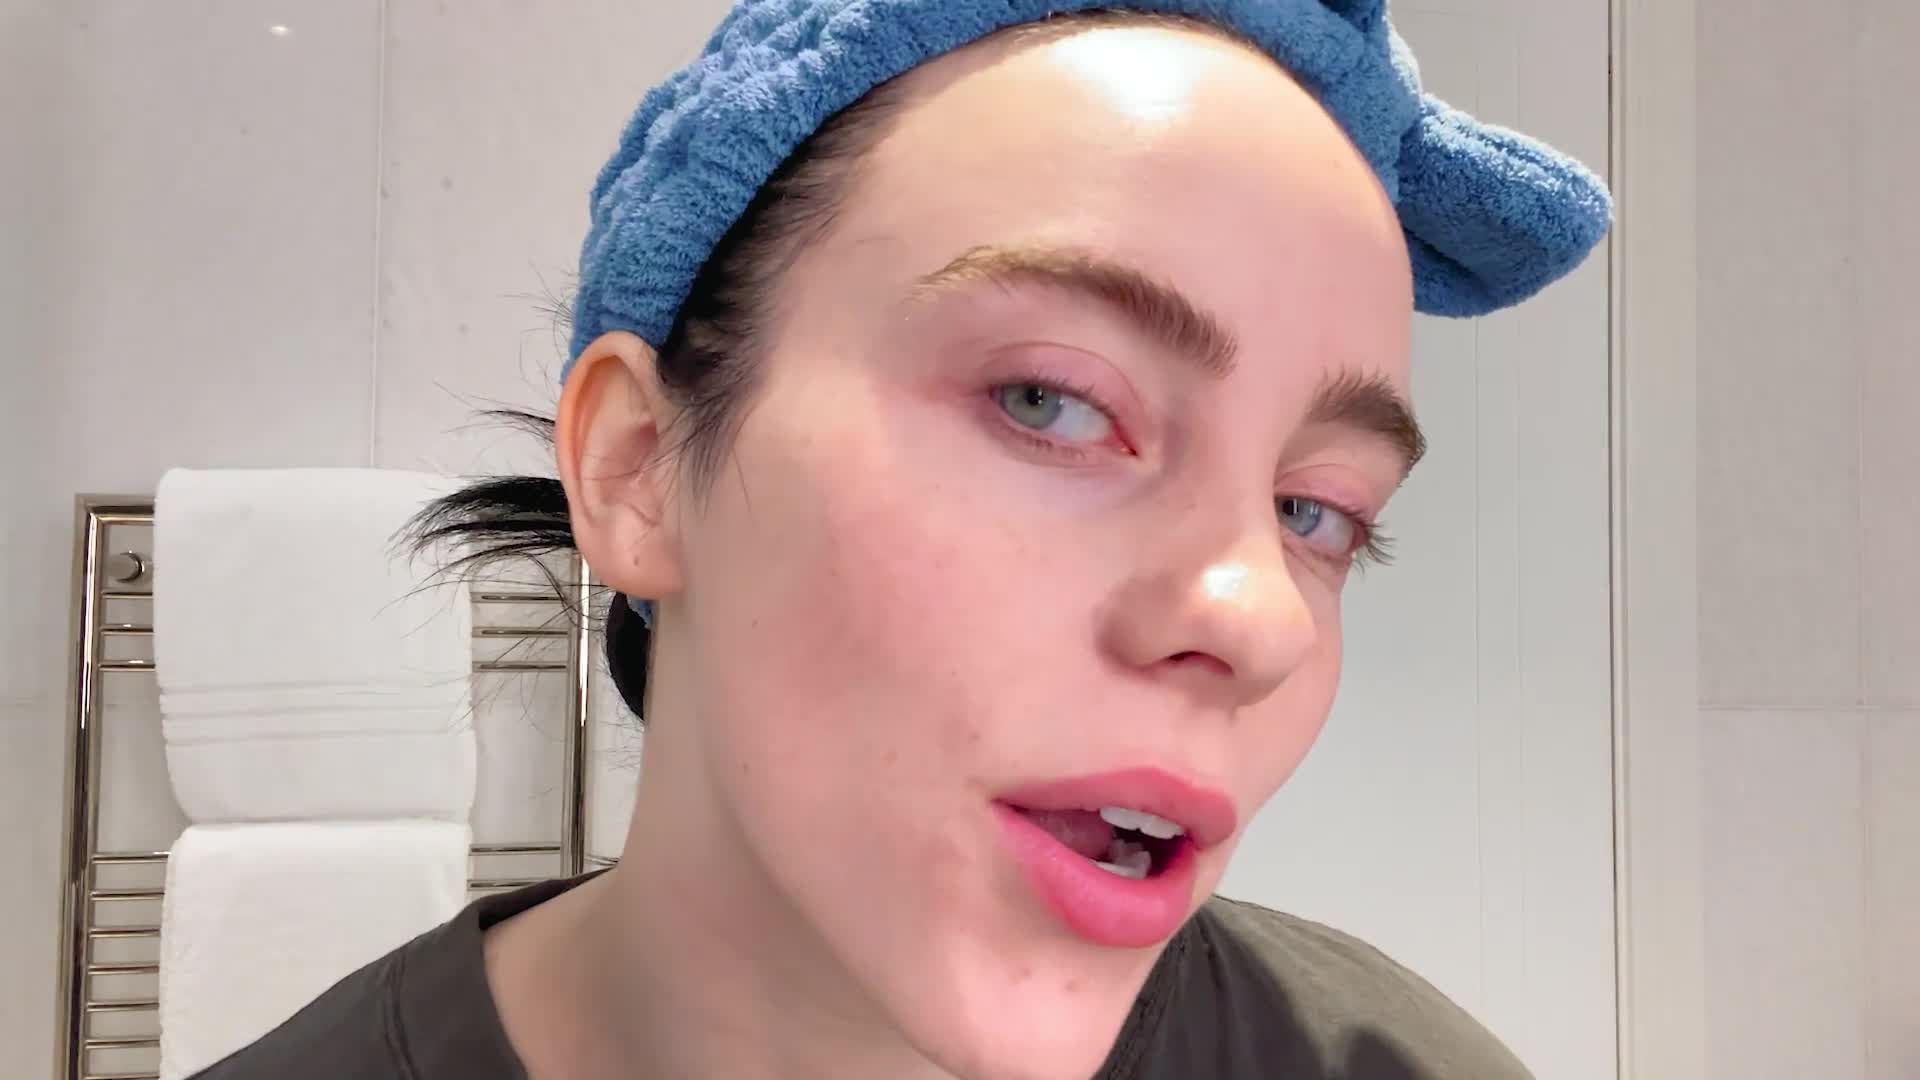 Watch Billie Eilish Shares Her Post-Show Beauty Routine, From